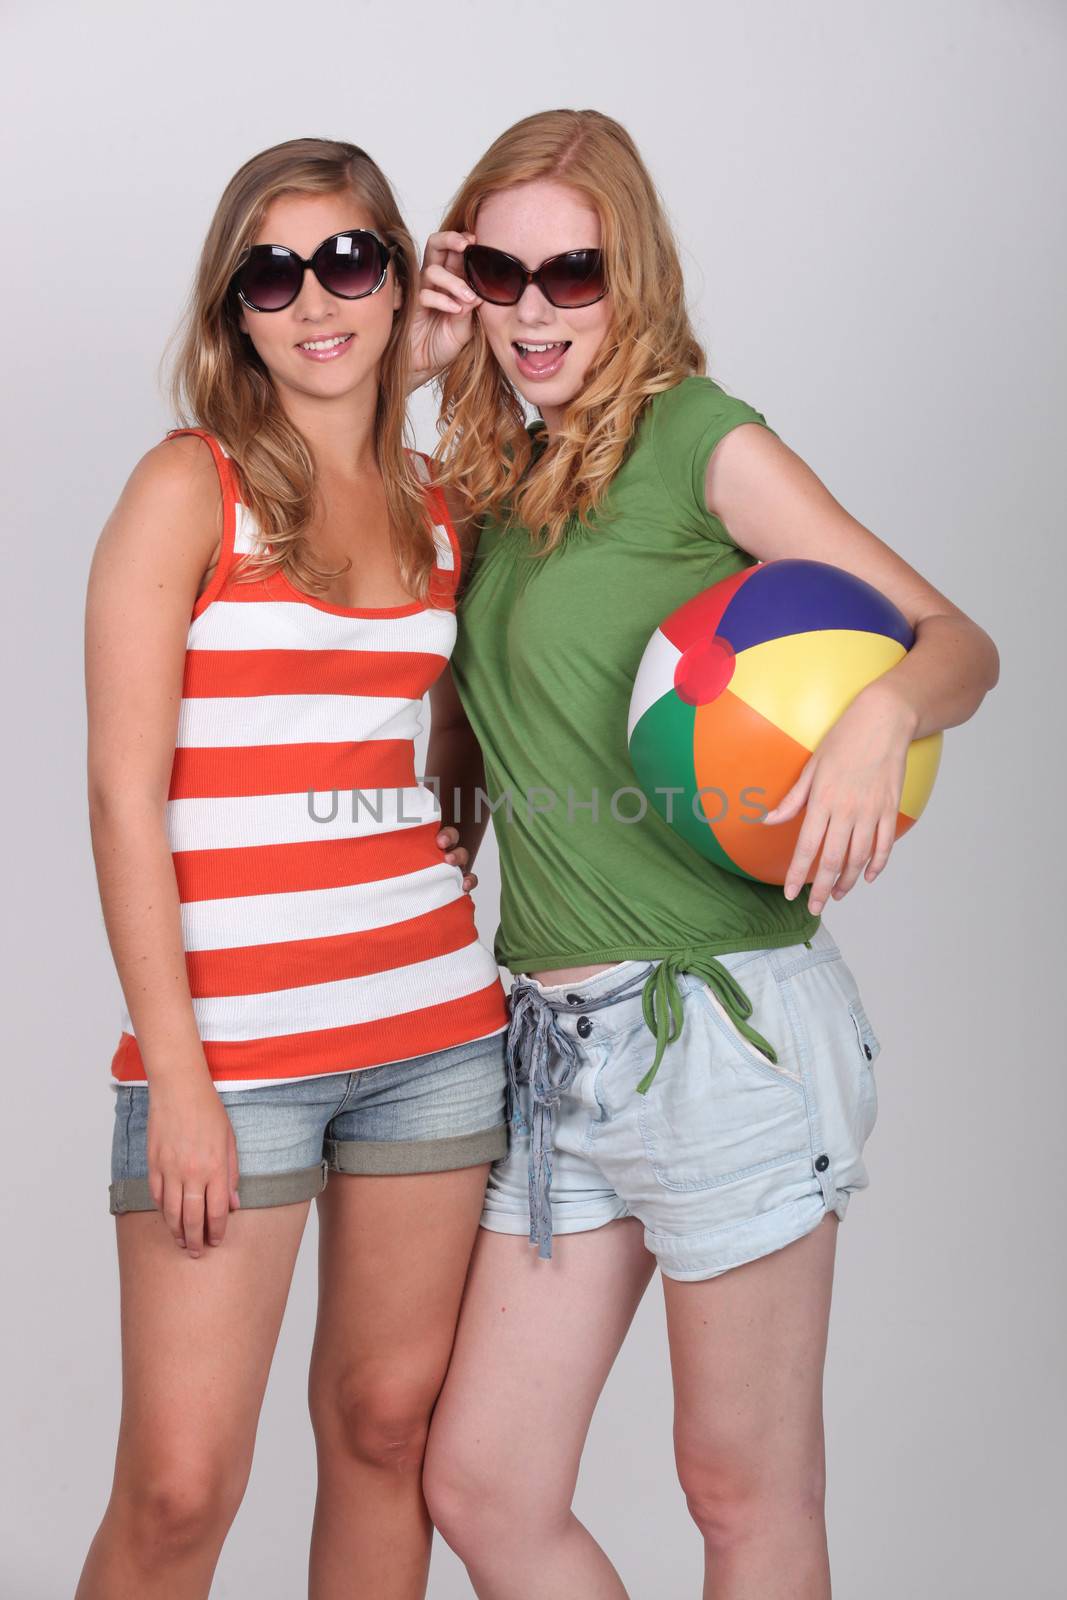 Two teenage girls dressed for summer fun by phovoir